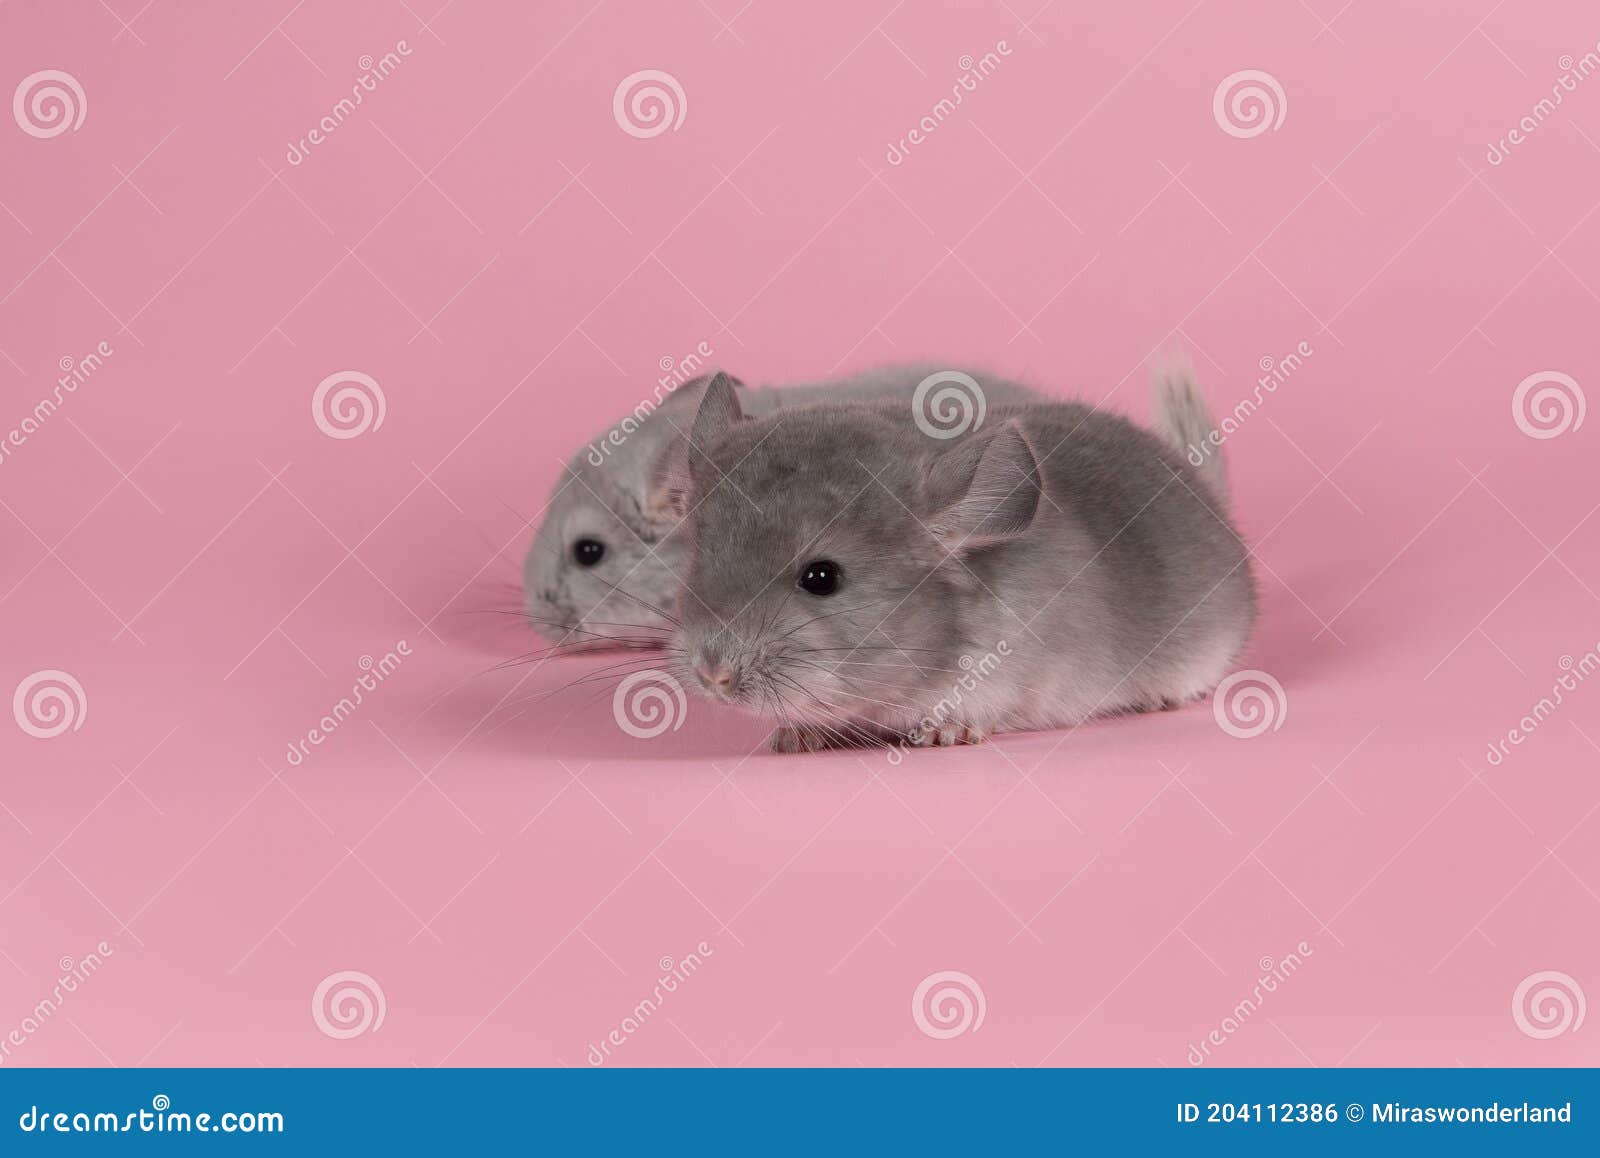 two cute baby chinchillas seen from the side on a pink background